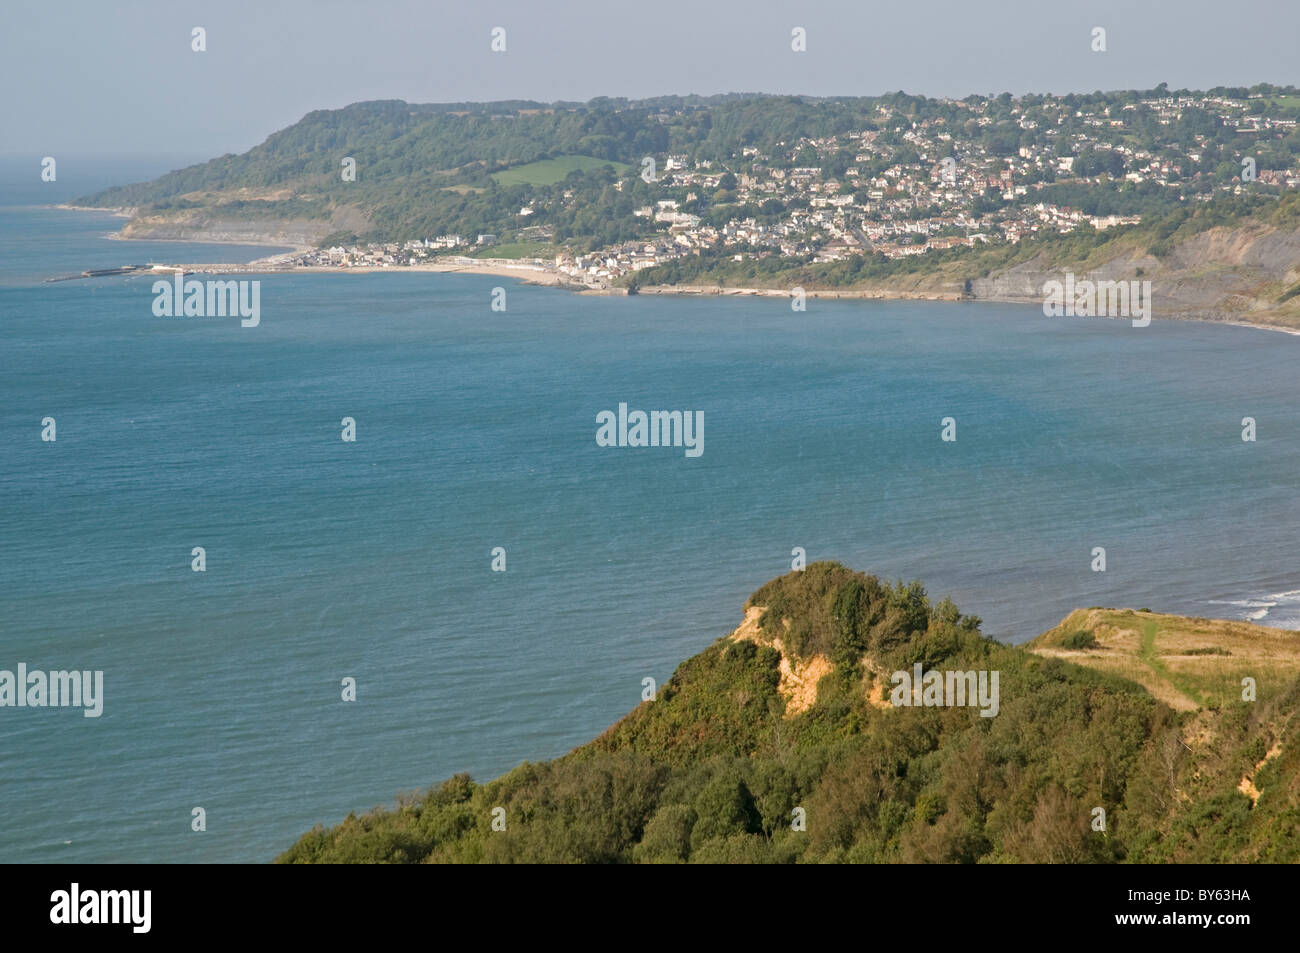 Looking east to Lyme Regis on the Dorset coast, viewed from Cains Folly cliffs Stock Photo